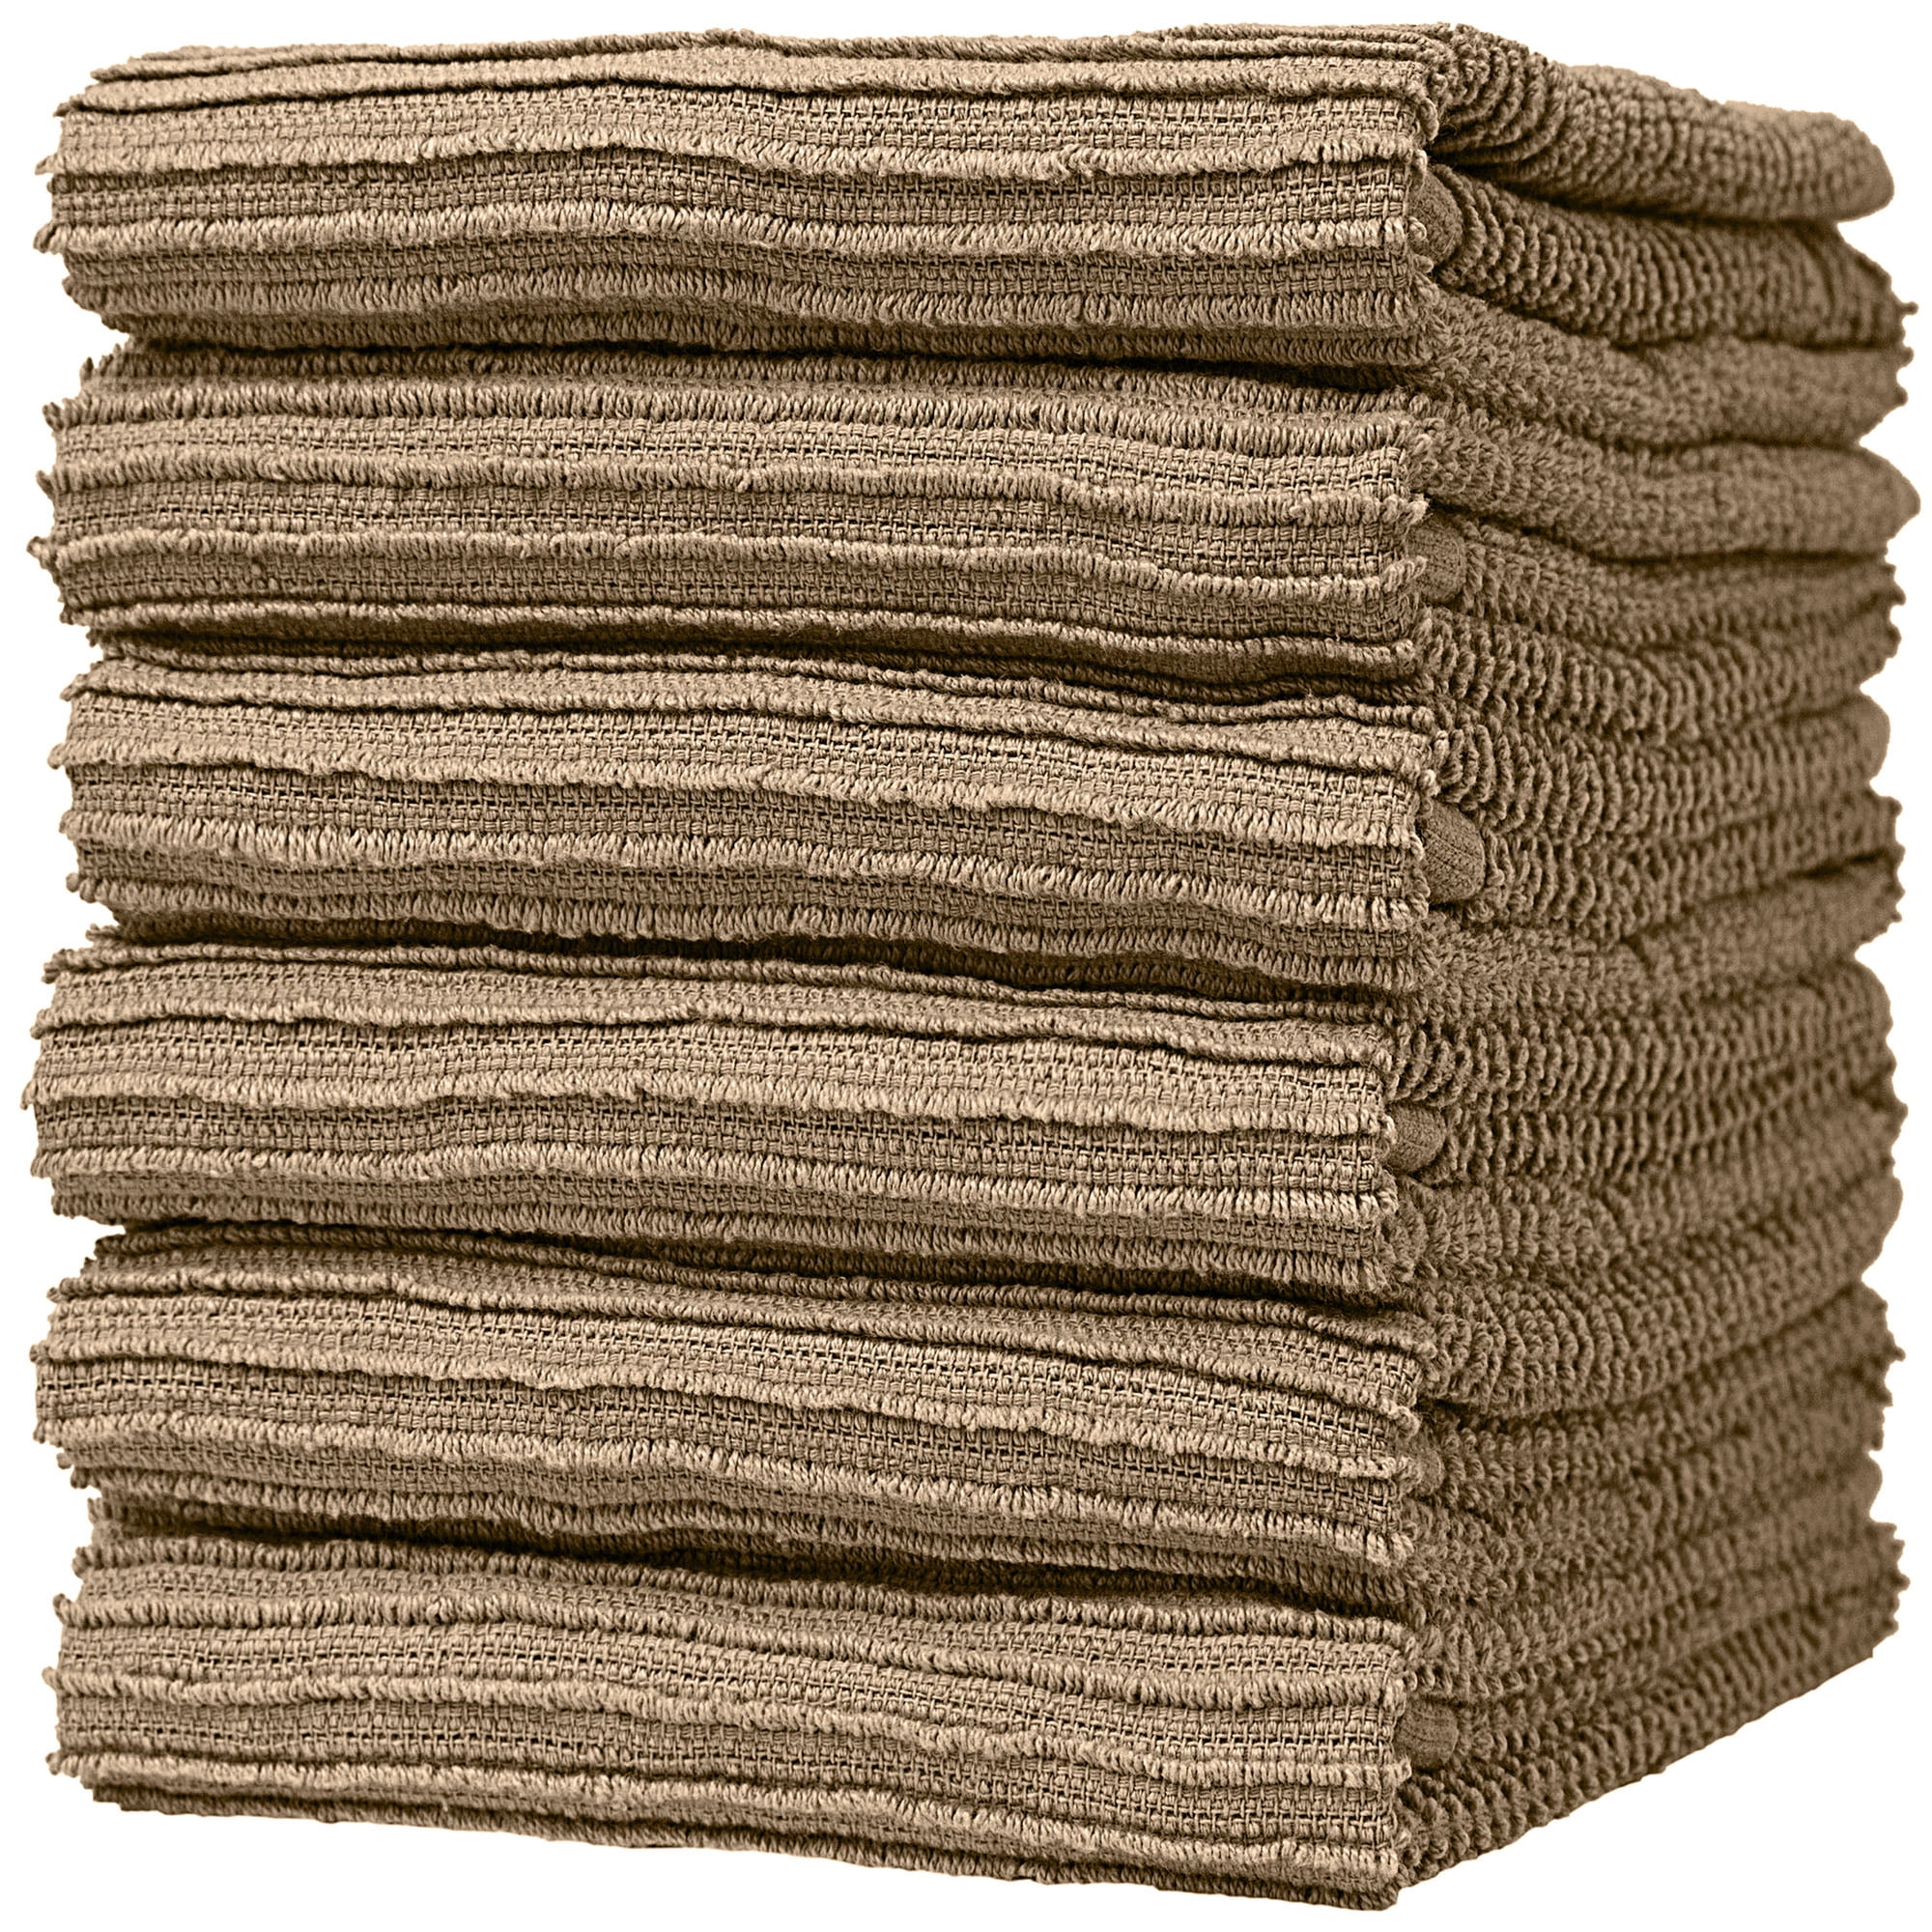 6 Premium Kitchen Towels (16x 26, 6 Pack) Large Cotton Kitchen Hand Towels Ribbed Design 340 GSM Highly Absorbent Tea Towels Set with Hanging Loop